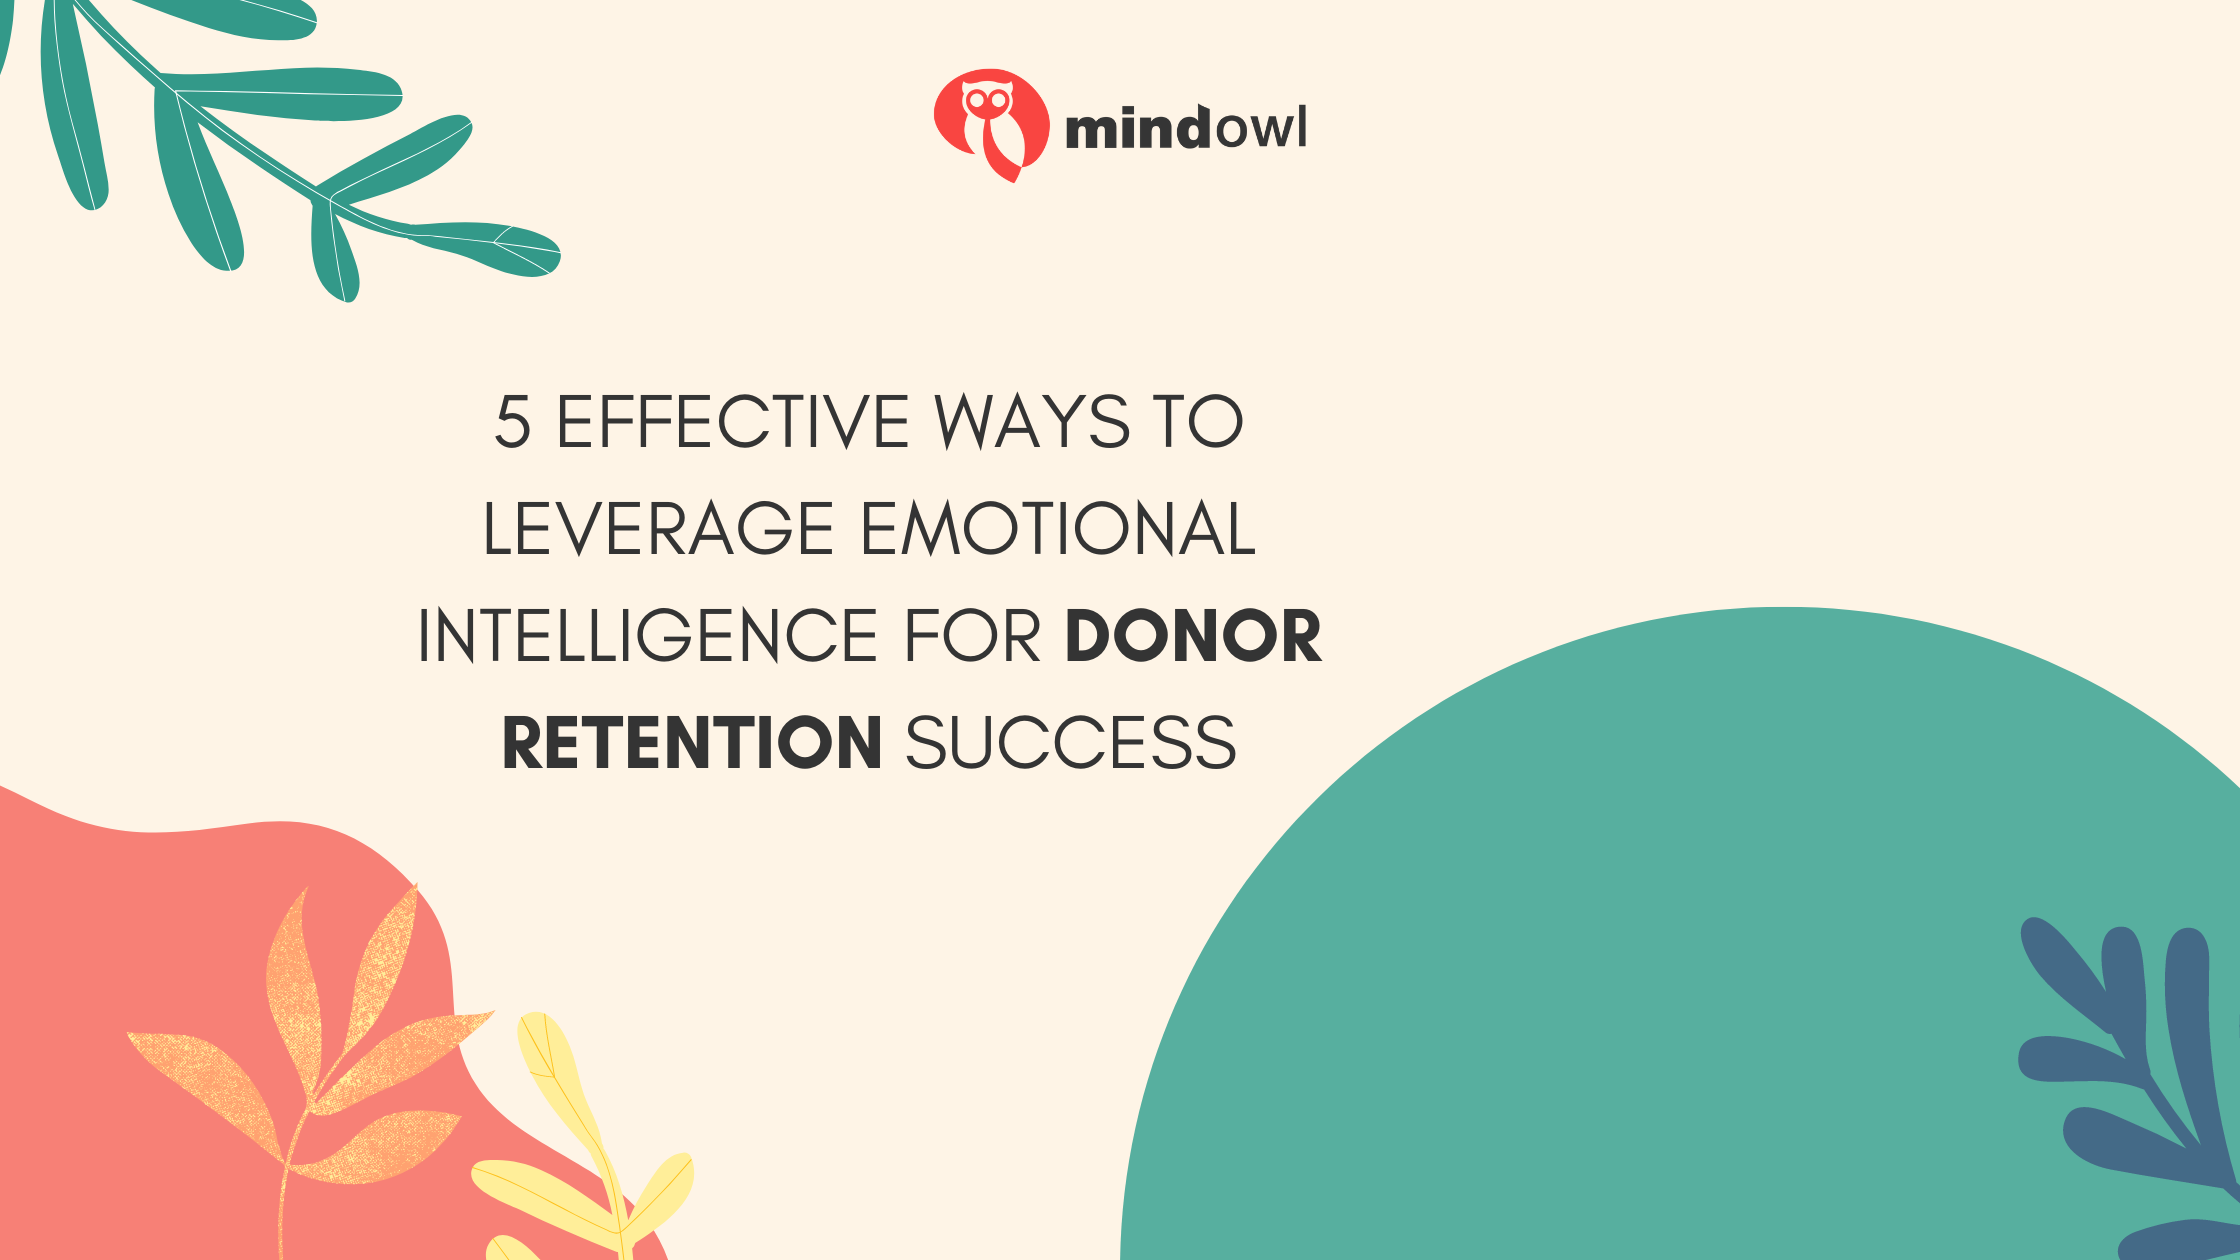 5 Effective Ways to Leverage Emotional Intelligence for Donor Retention Success